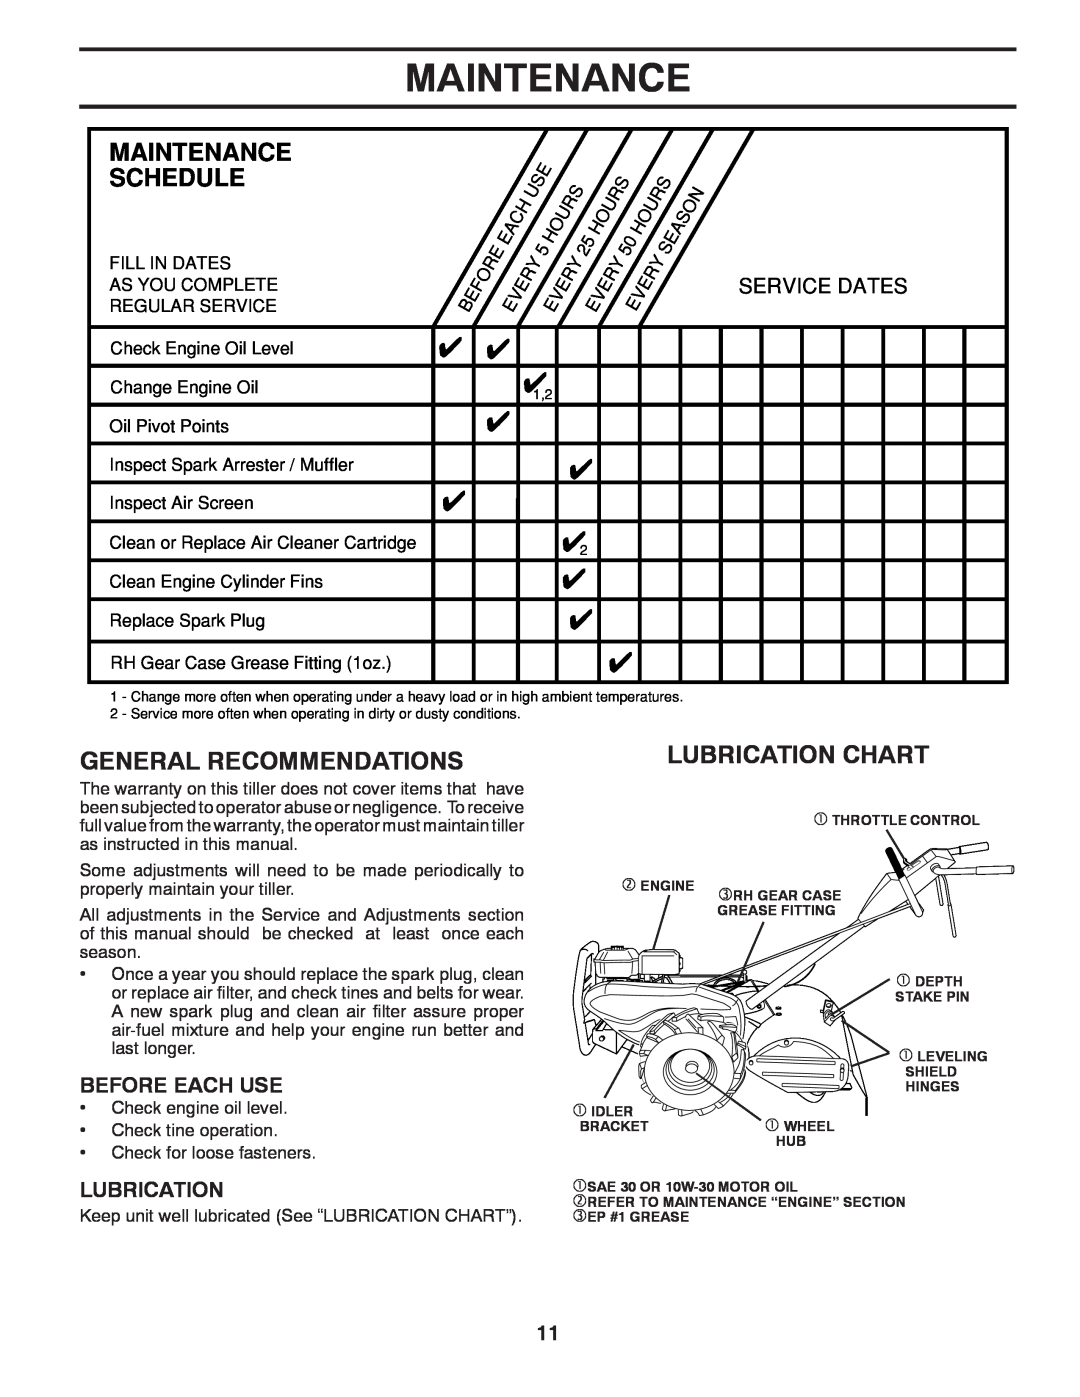 Poulan PRRT850 manual Maintenance Schedule, General Recommendations, Lubrication Chart, Service Dates, Before Each Use 